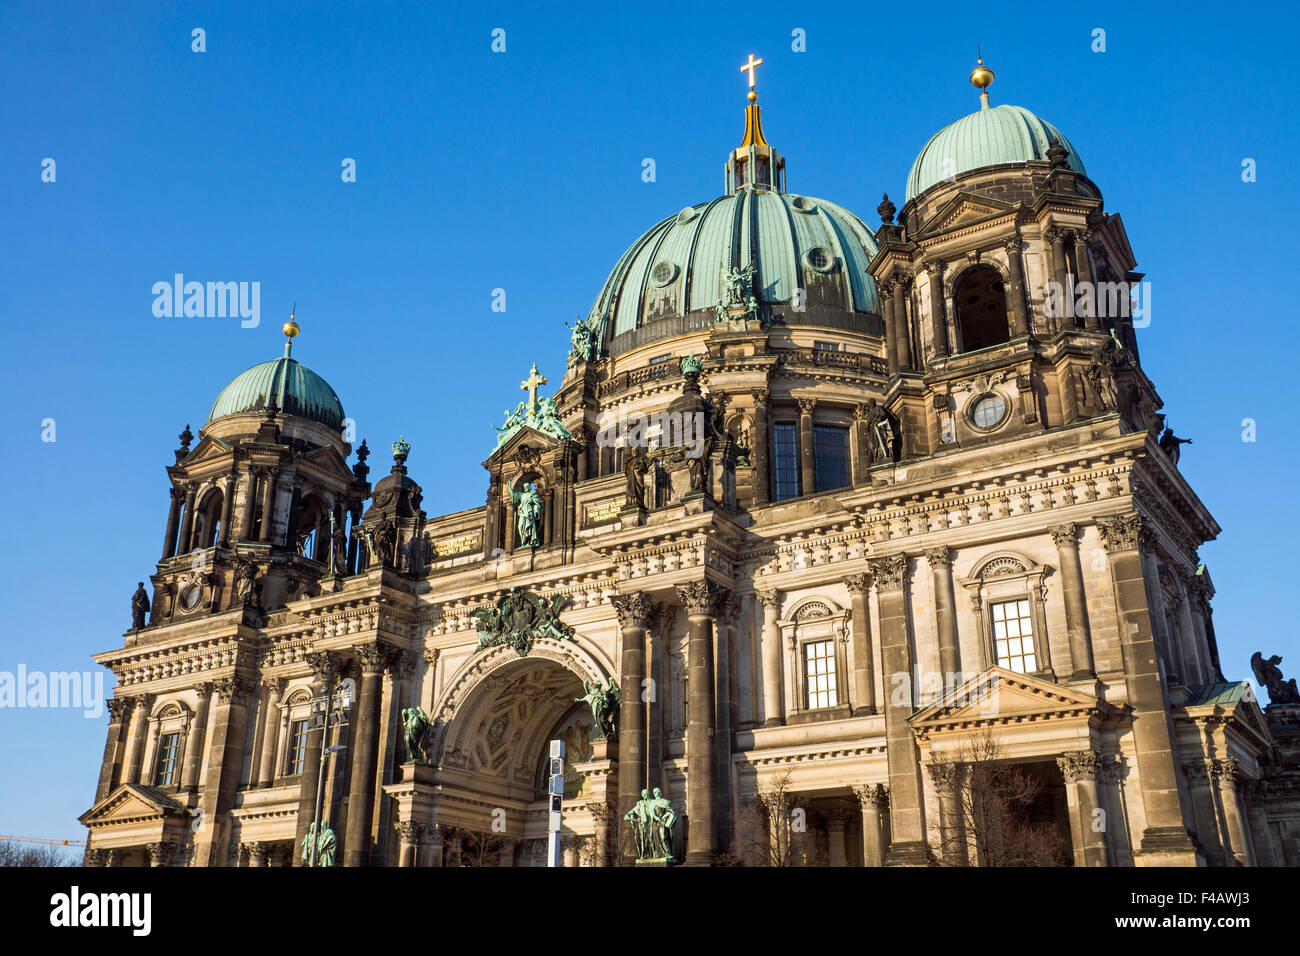 The Berlin Dom on a sunny evening Stock Photo